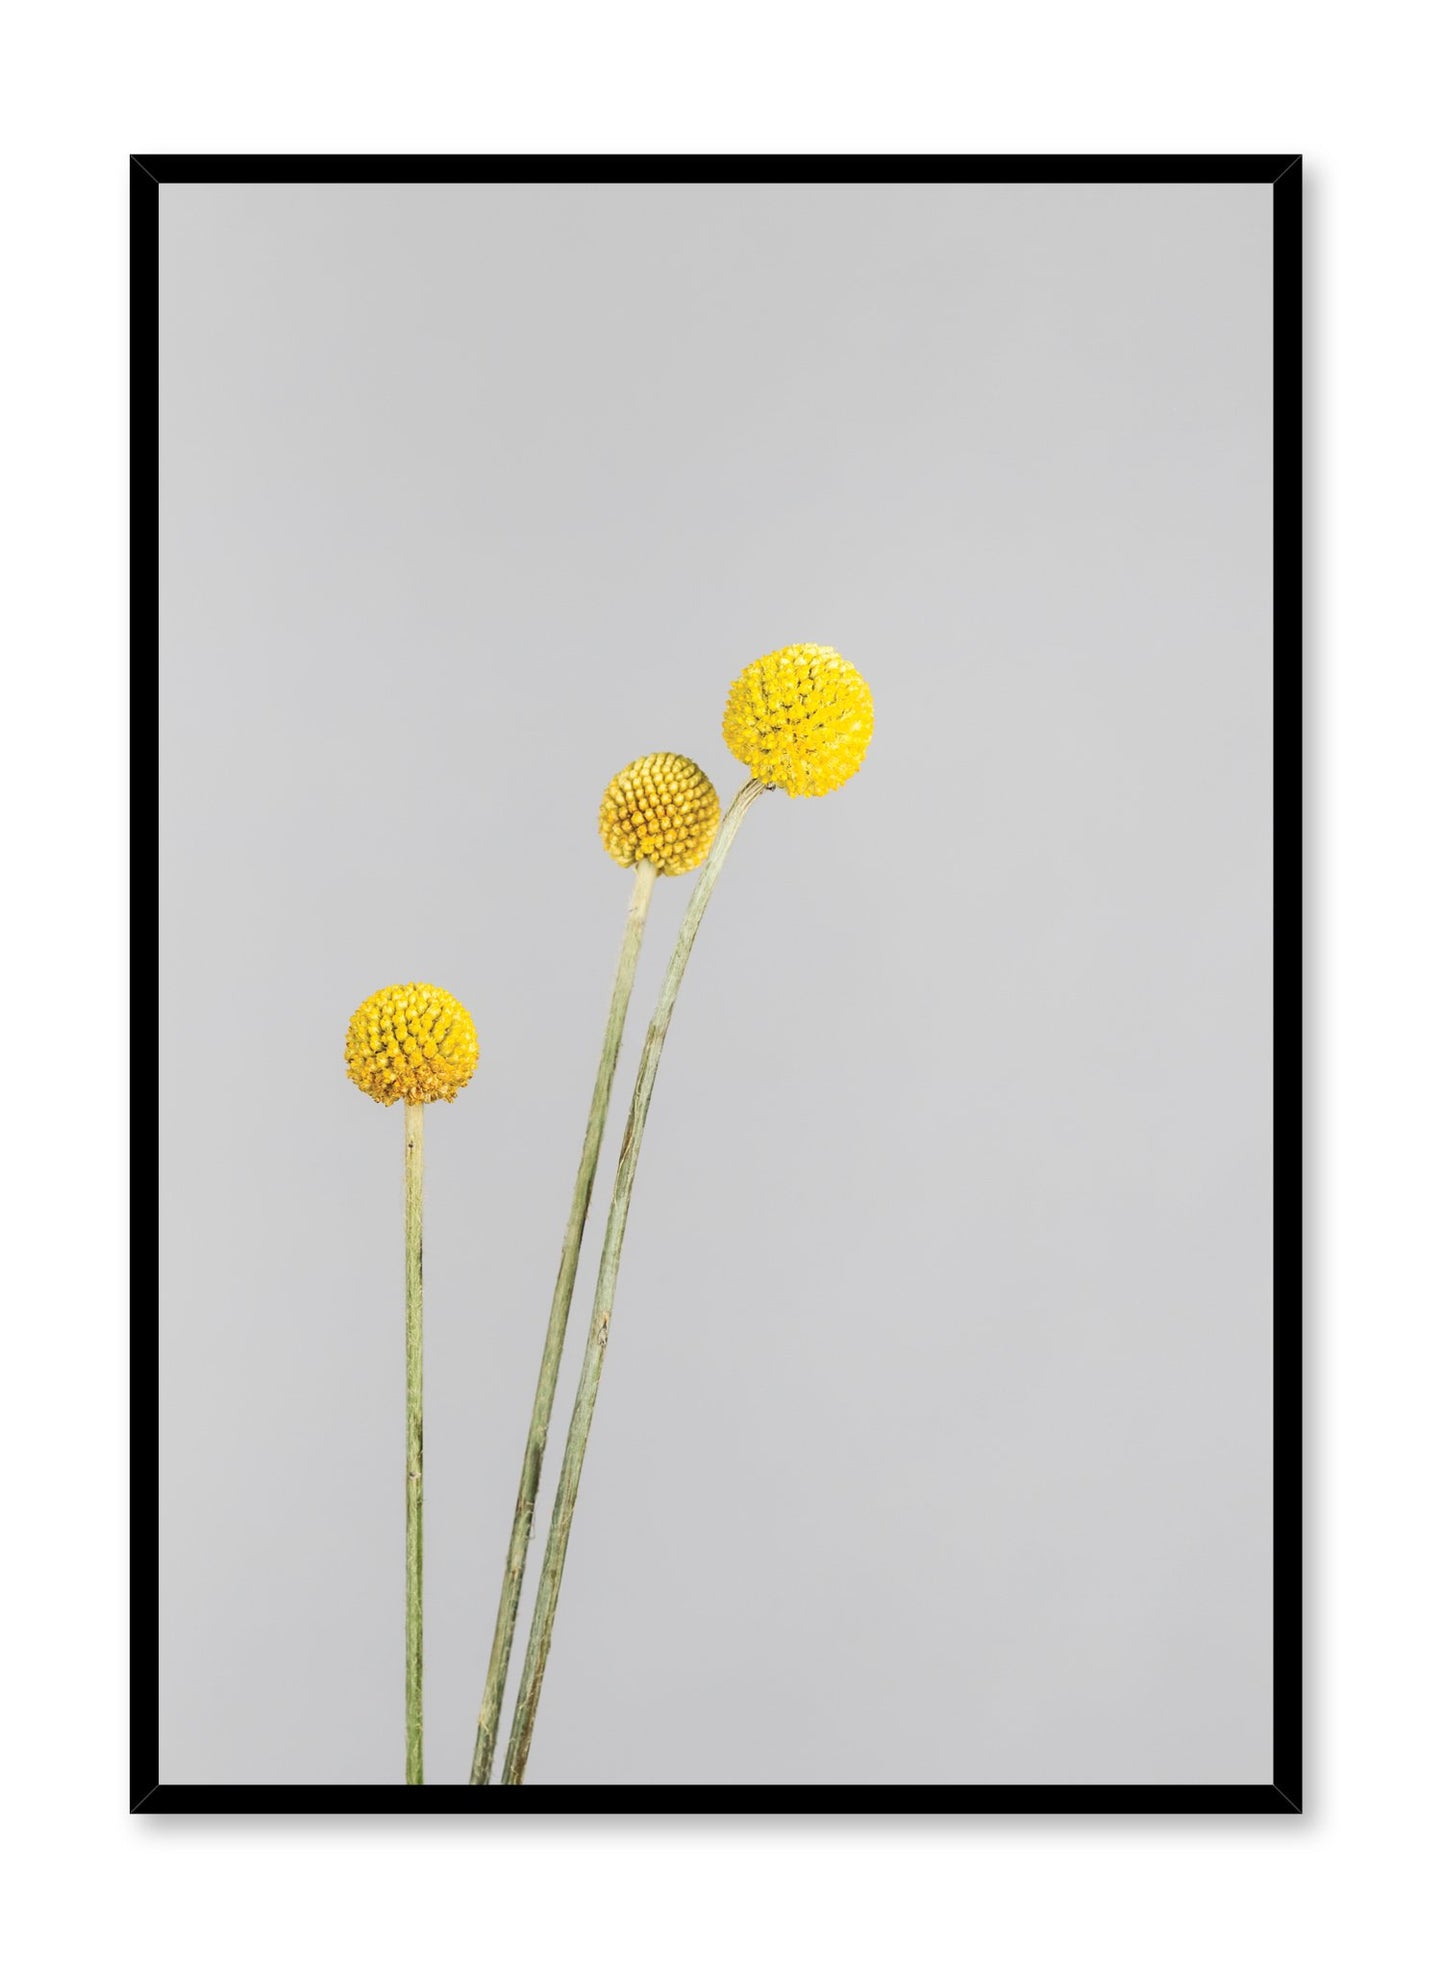 Scandinavian poster by Opposite Wall with minimalist photo of Billy Buttons